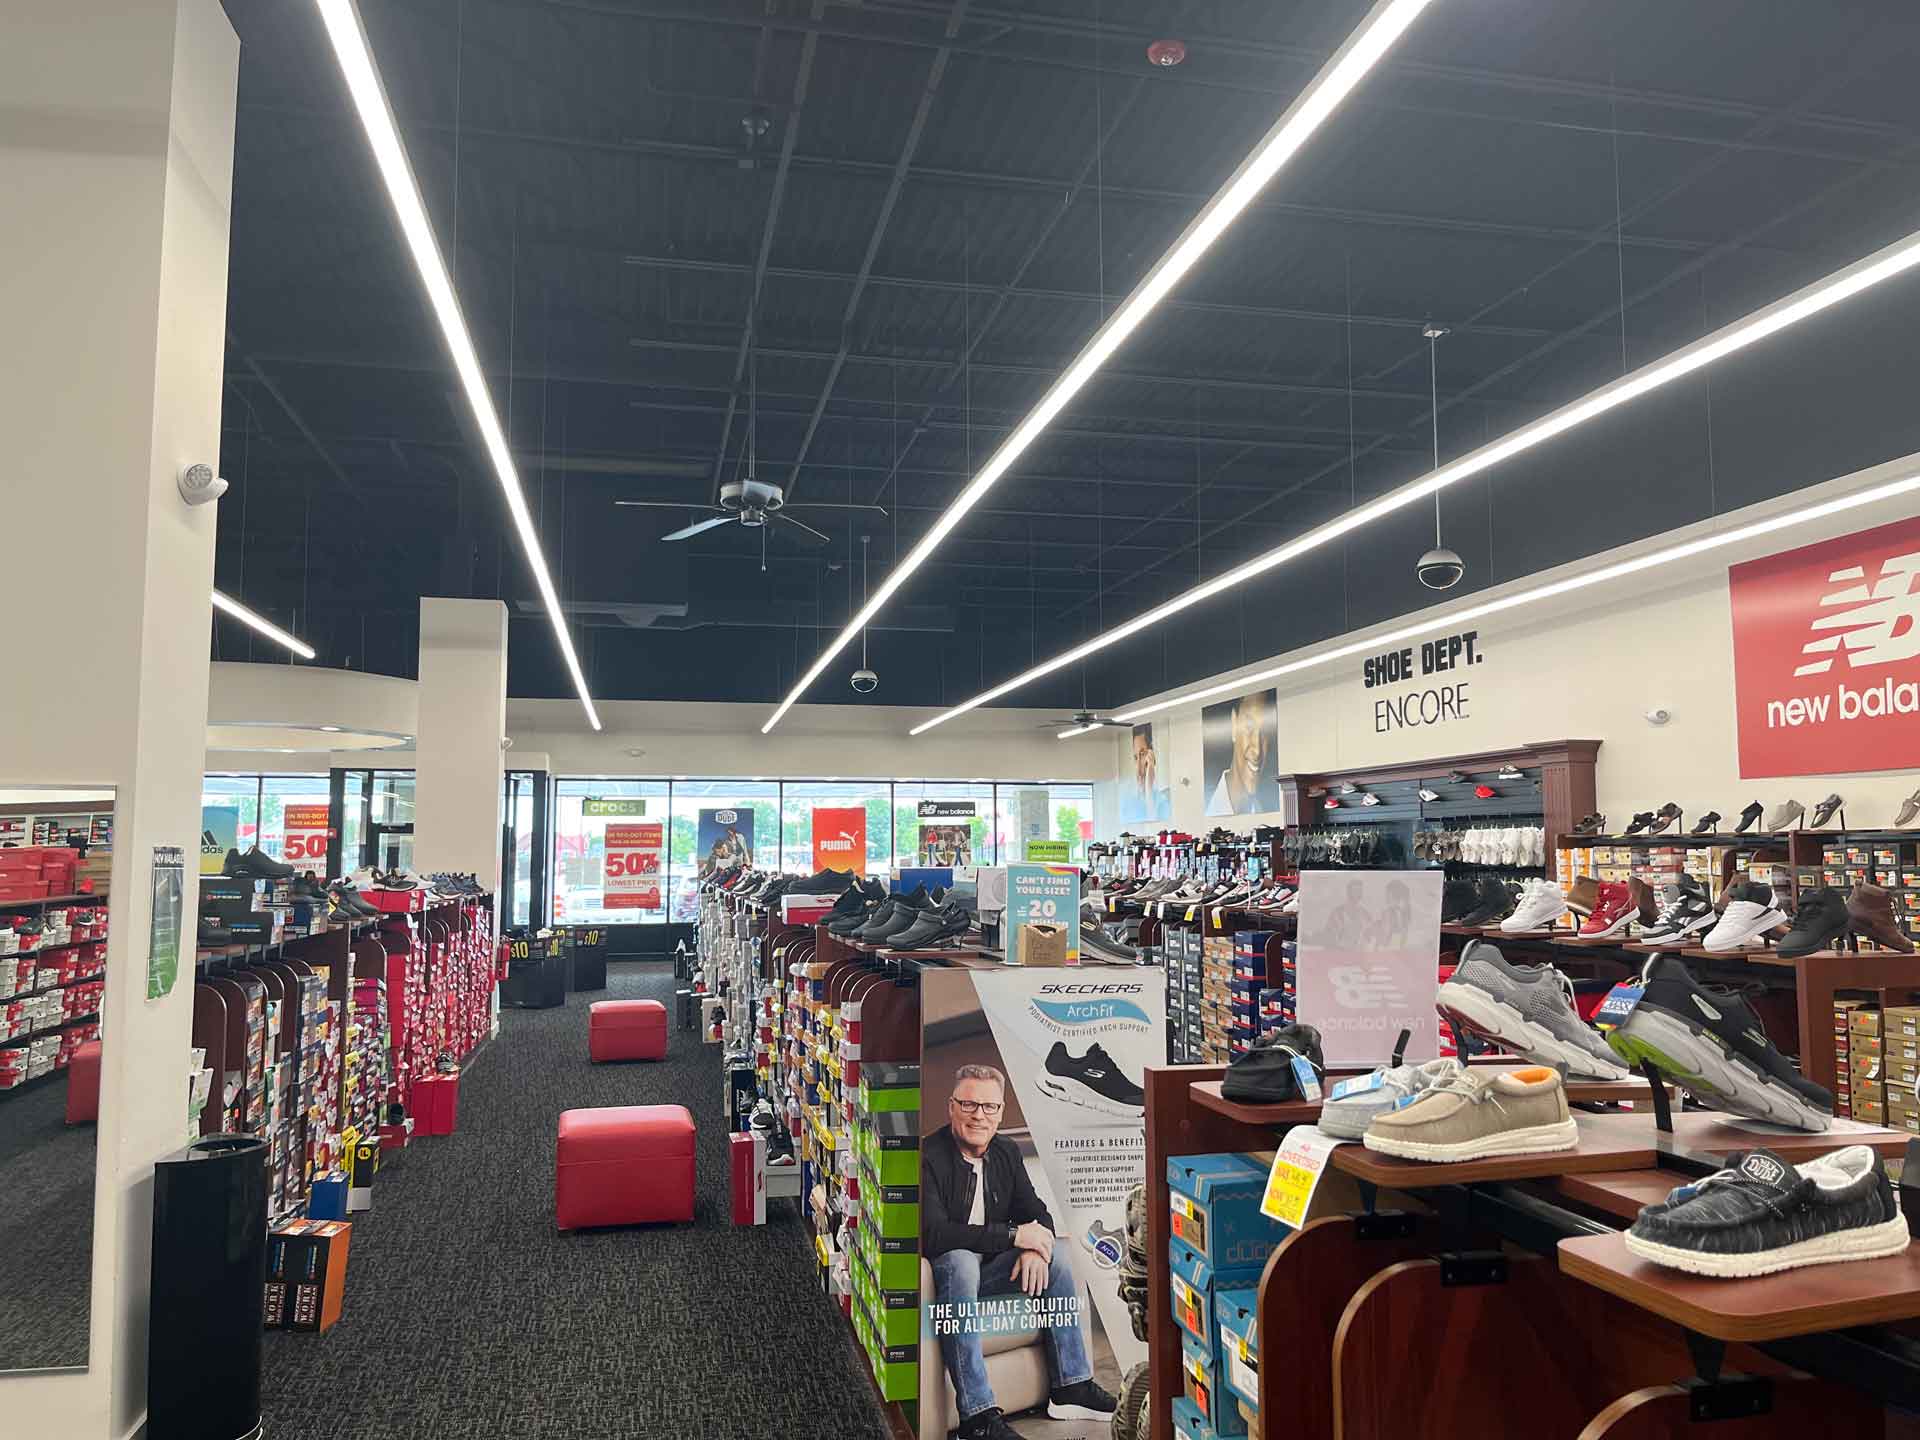 Interior of Shoe Dept. with new lighting